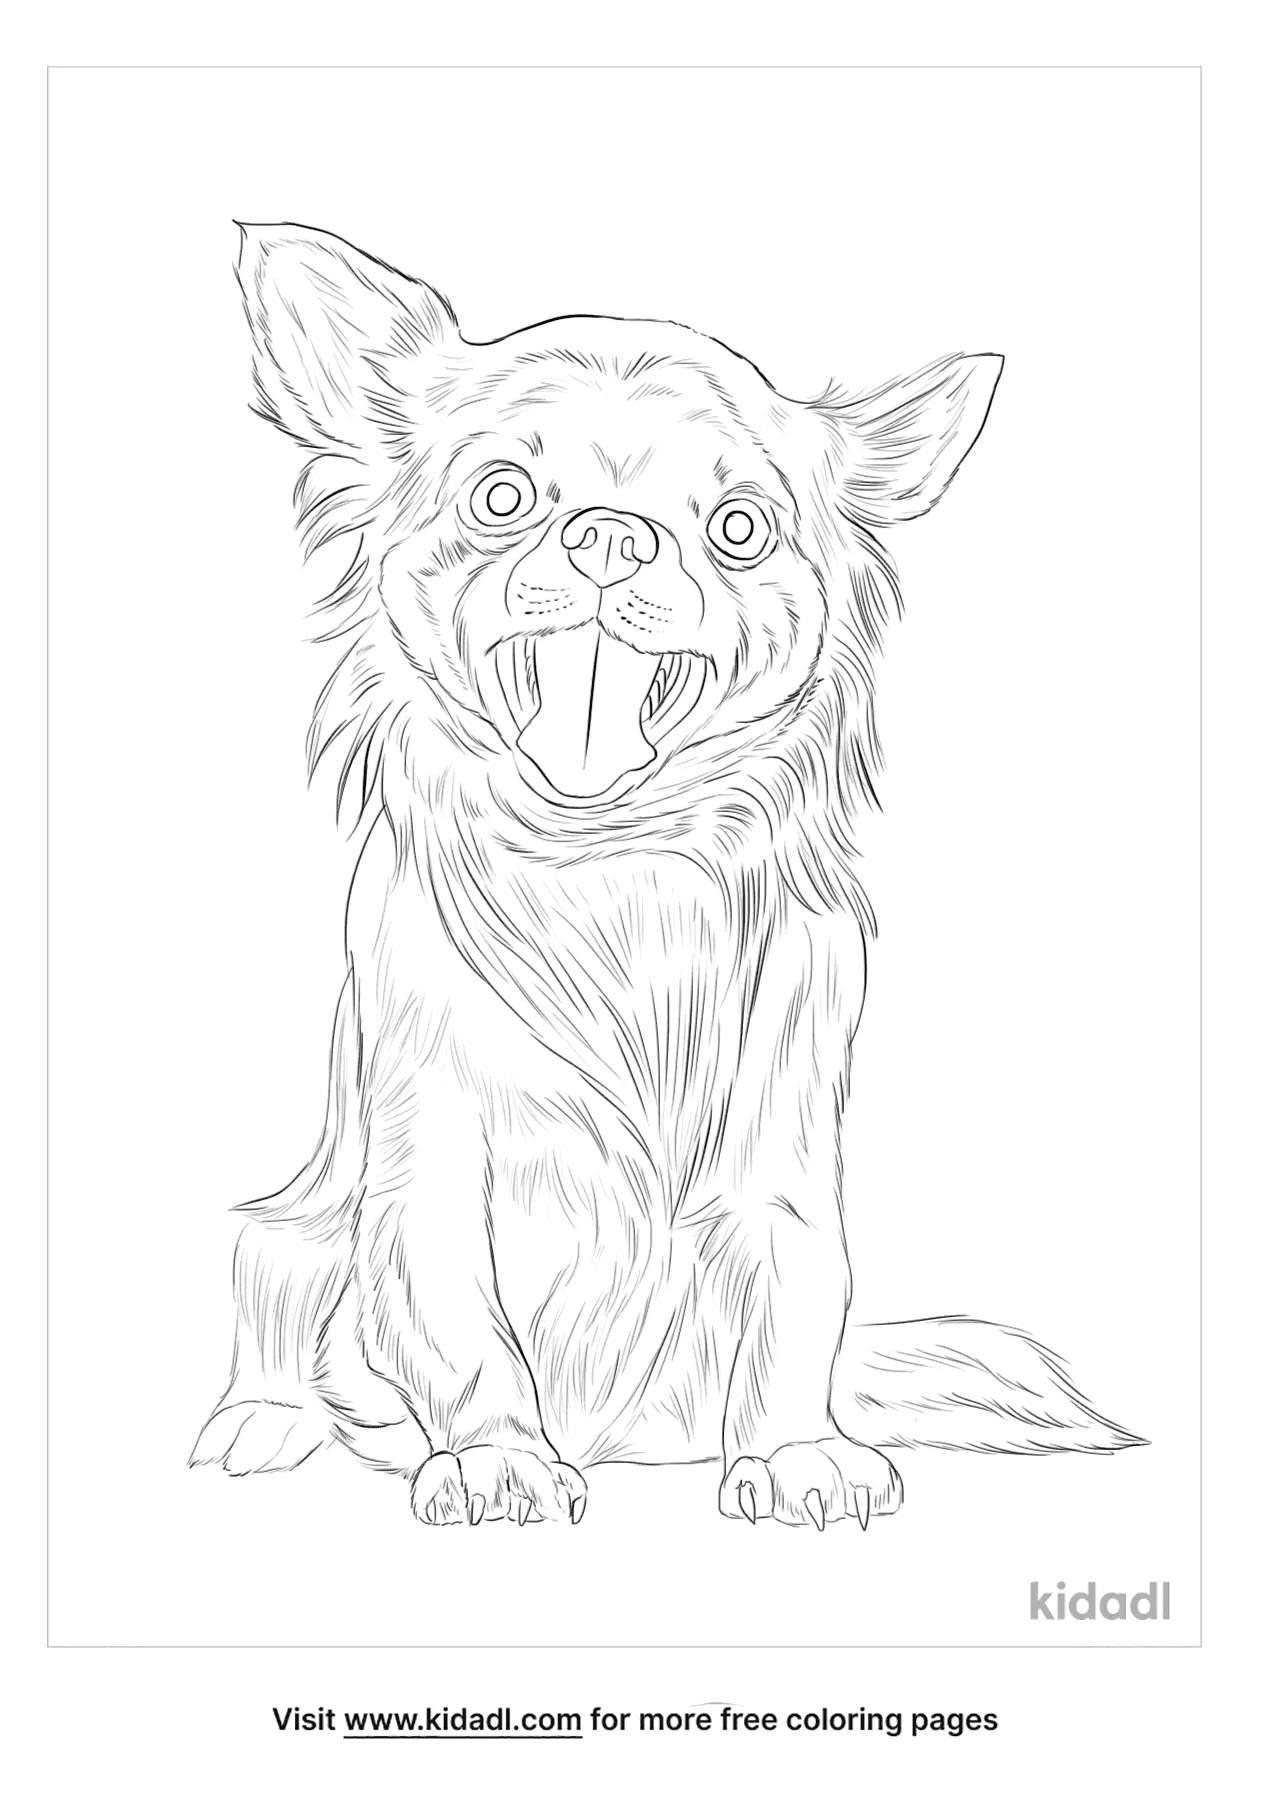 Pekingese Chihuahua Mix Coloring Page